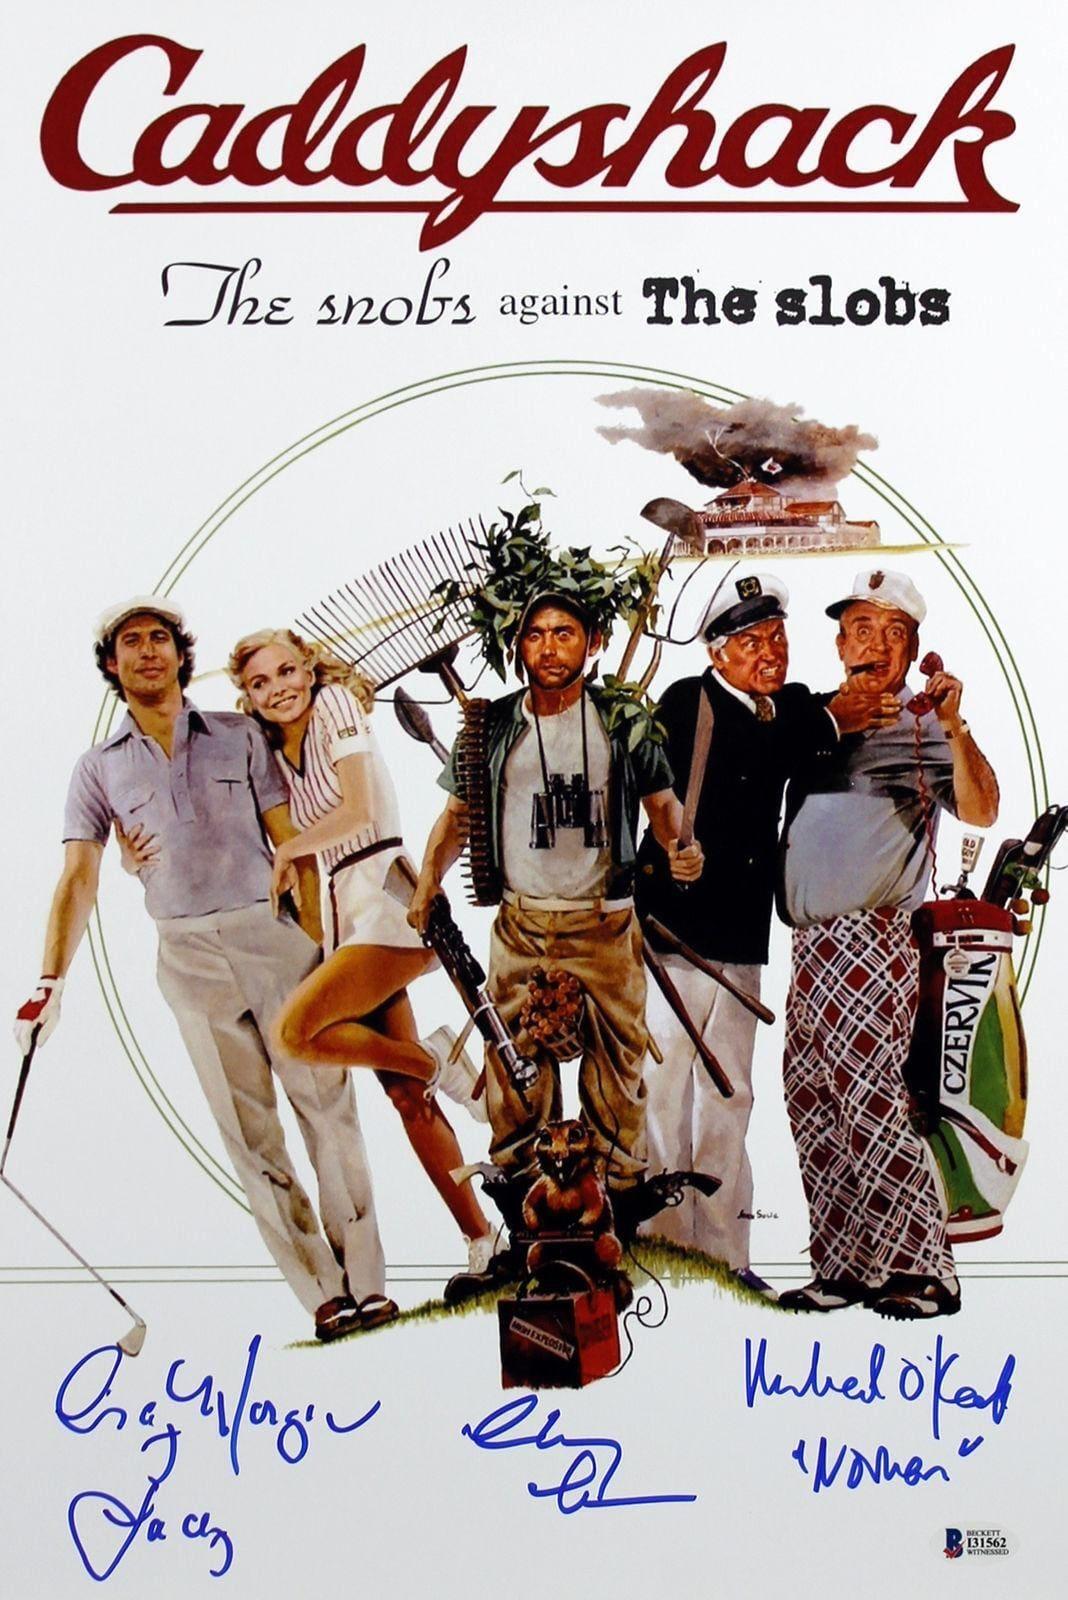 Caddyshack: The 19th Hole poster